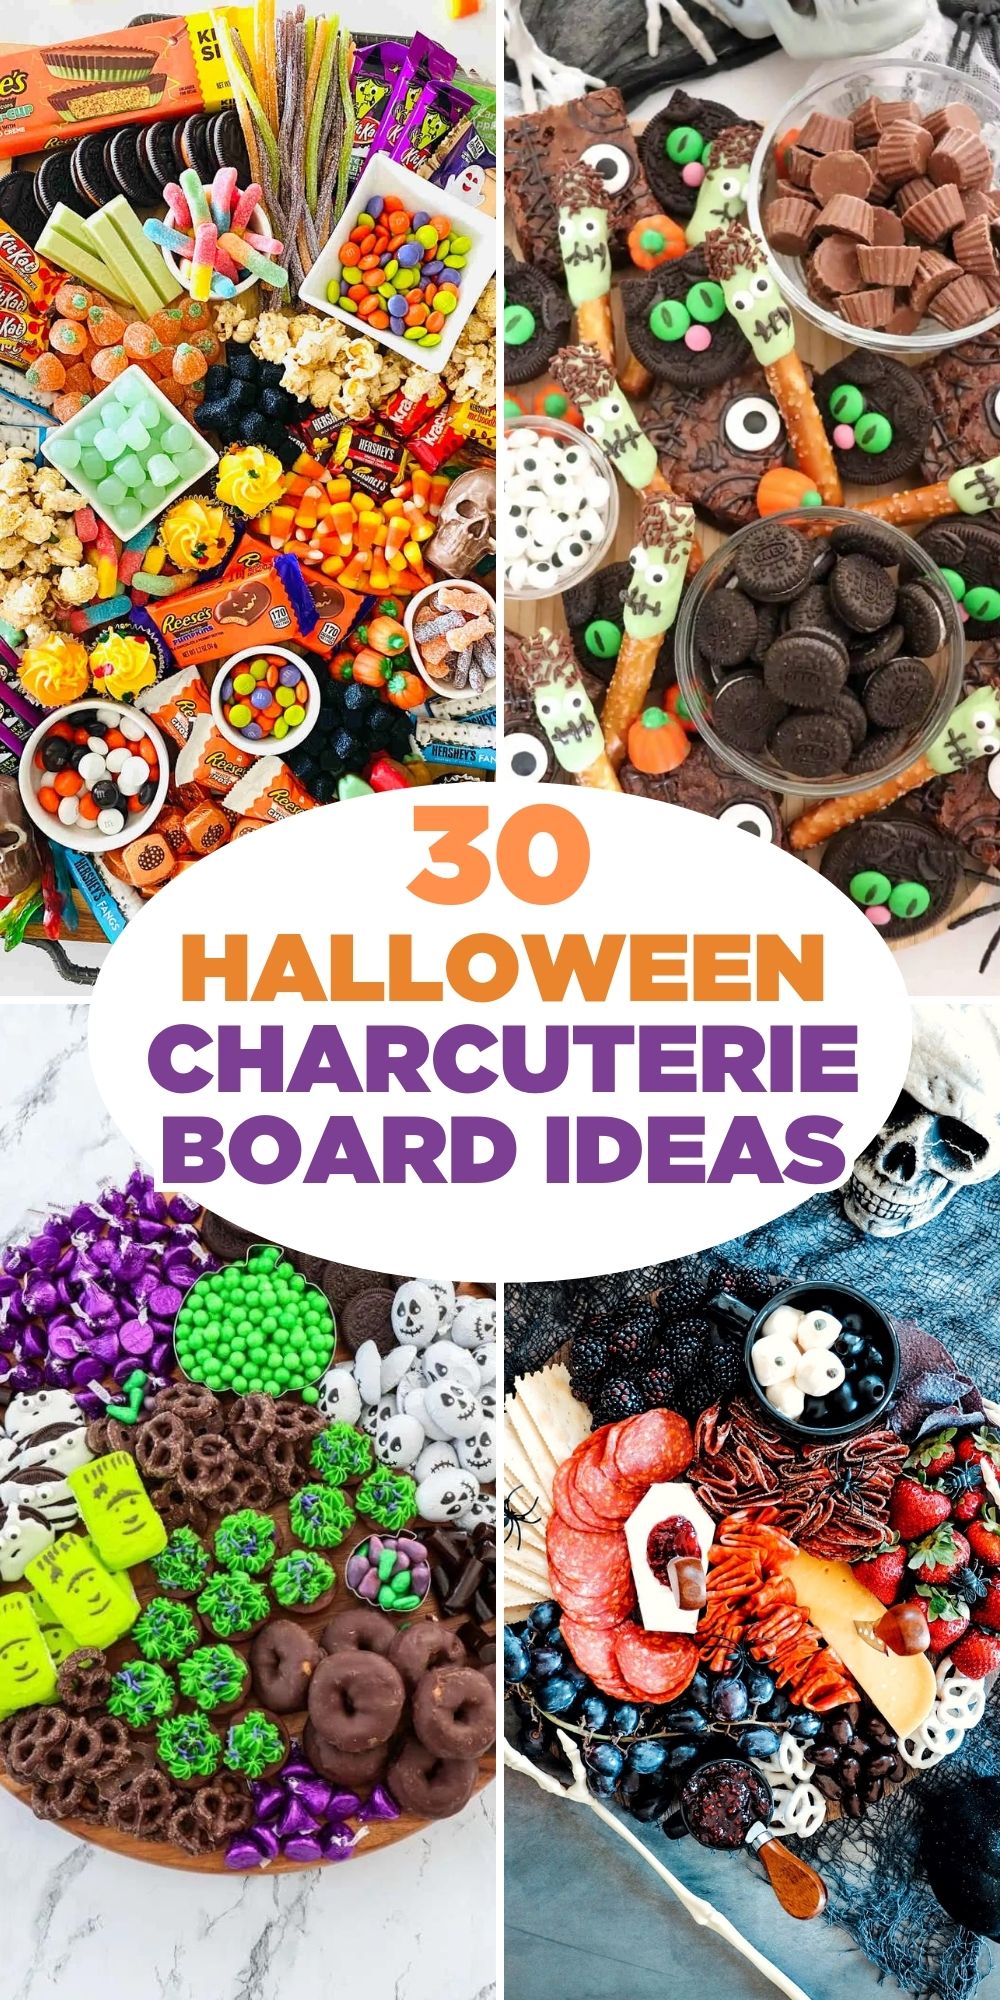 We've collected all the best spooktacular Halloween Charcuterie Board Ideas all in one place. From whimsical and a bit ghoulish that will delight the kids to grazing boards perfect for the adults, you'll have plenty to choose from with these creative ideas. 